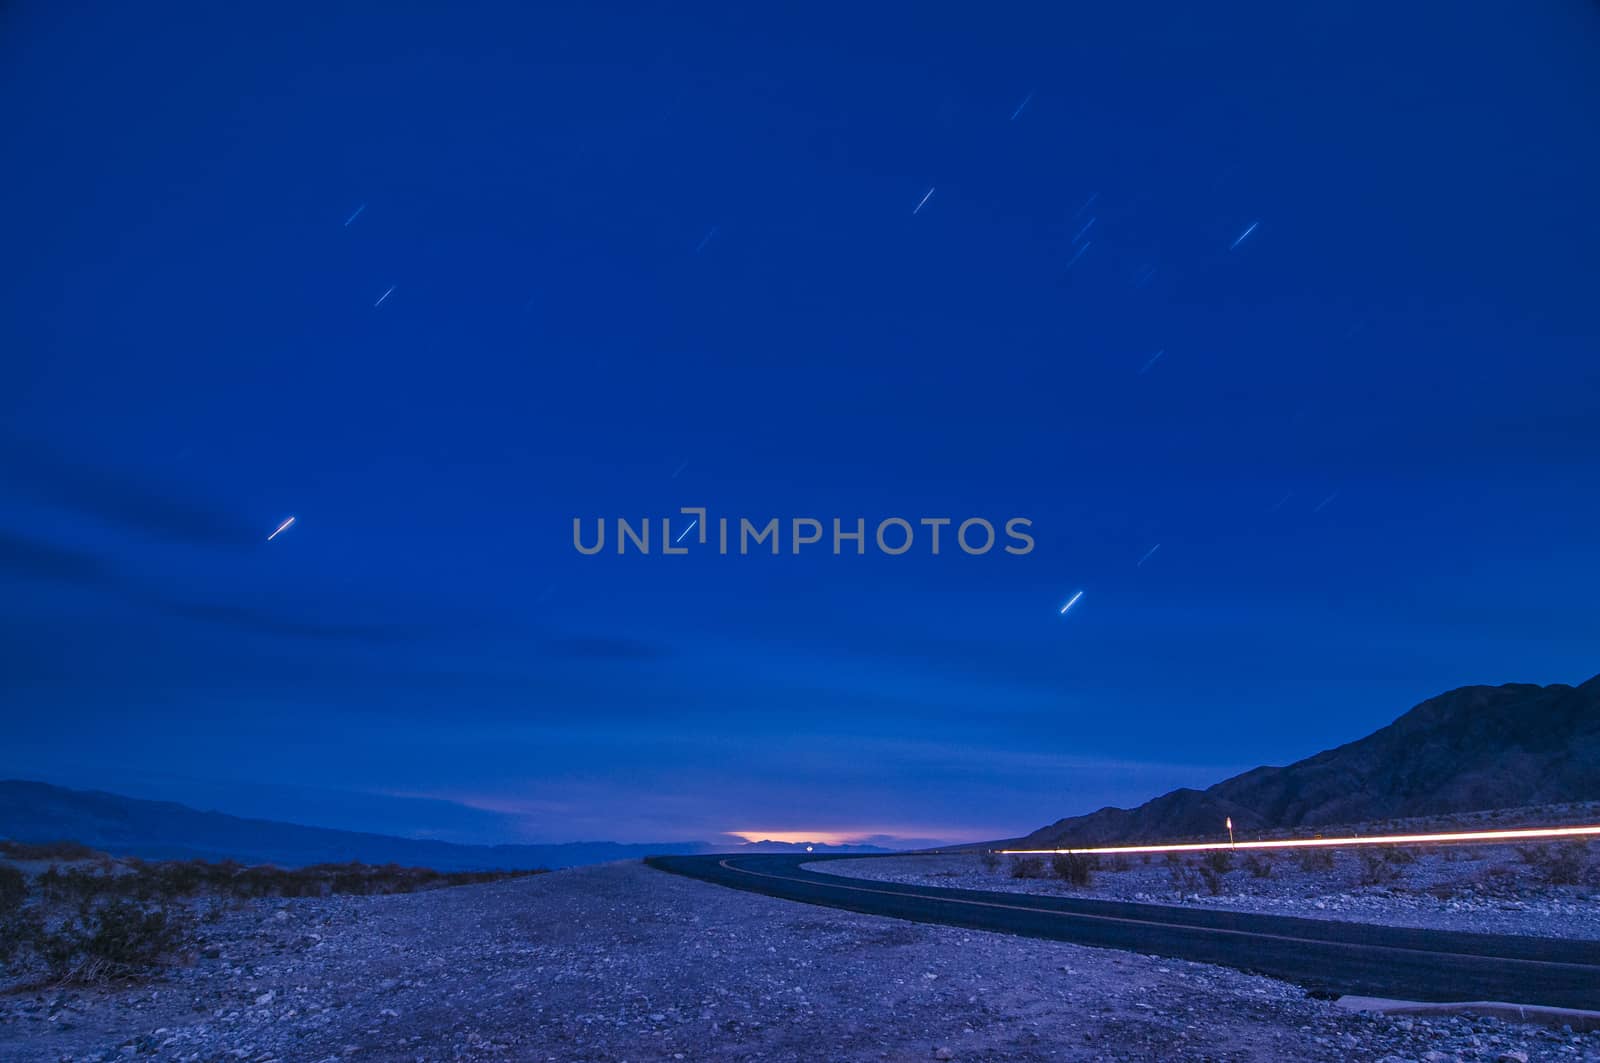 Moonlit road with car's headlight trails and star-trails in Death Valley, California